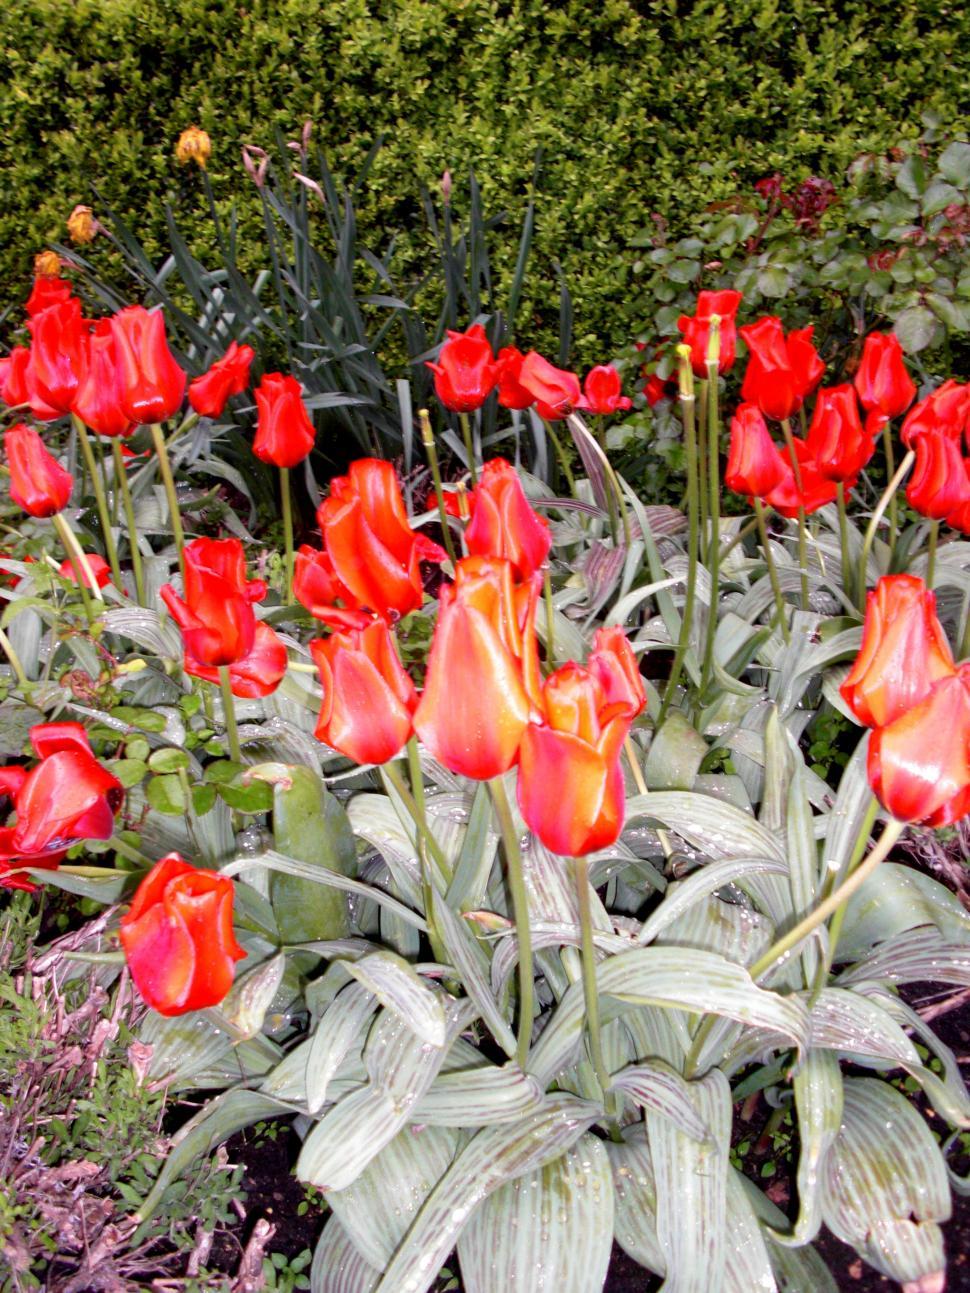 Free Image of A Bunch of Red Flowers in a Garden 